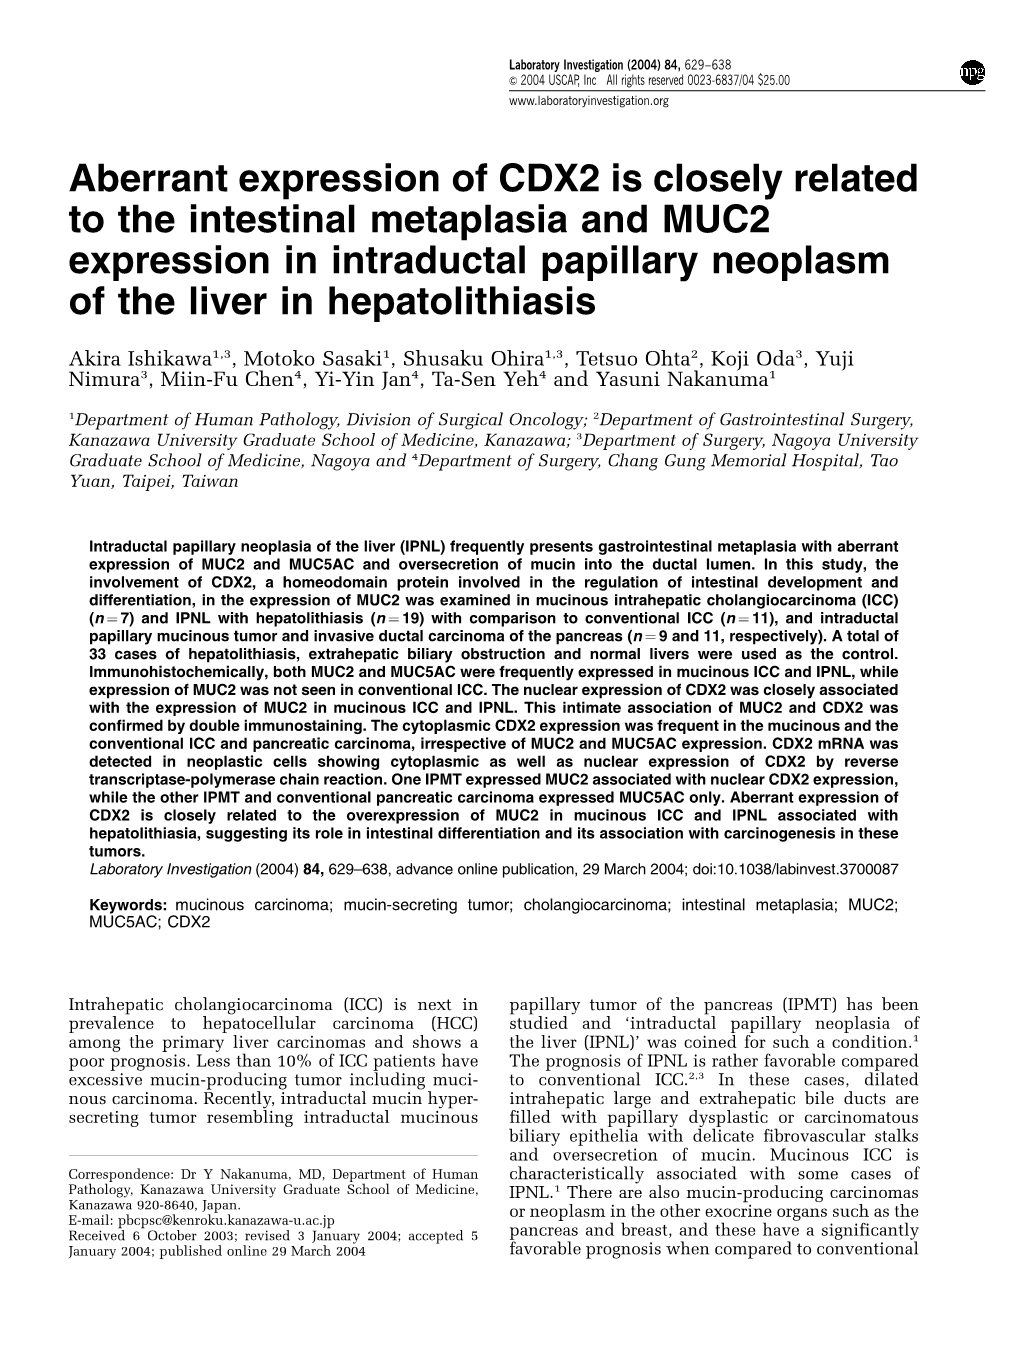 Aberrant Expression of CDX2 Is Closely Related to the Intestinal Metaplasia and MUC2 Expression in Intraductal Papillary Neoplasm of the Liver in Hepatolithiasis